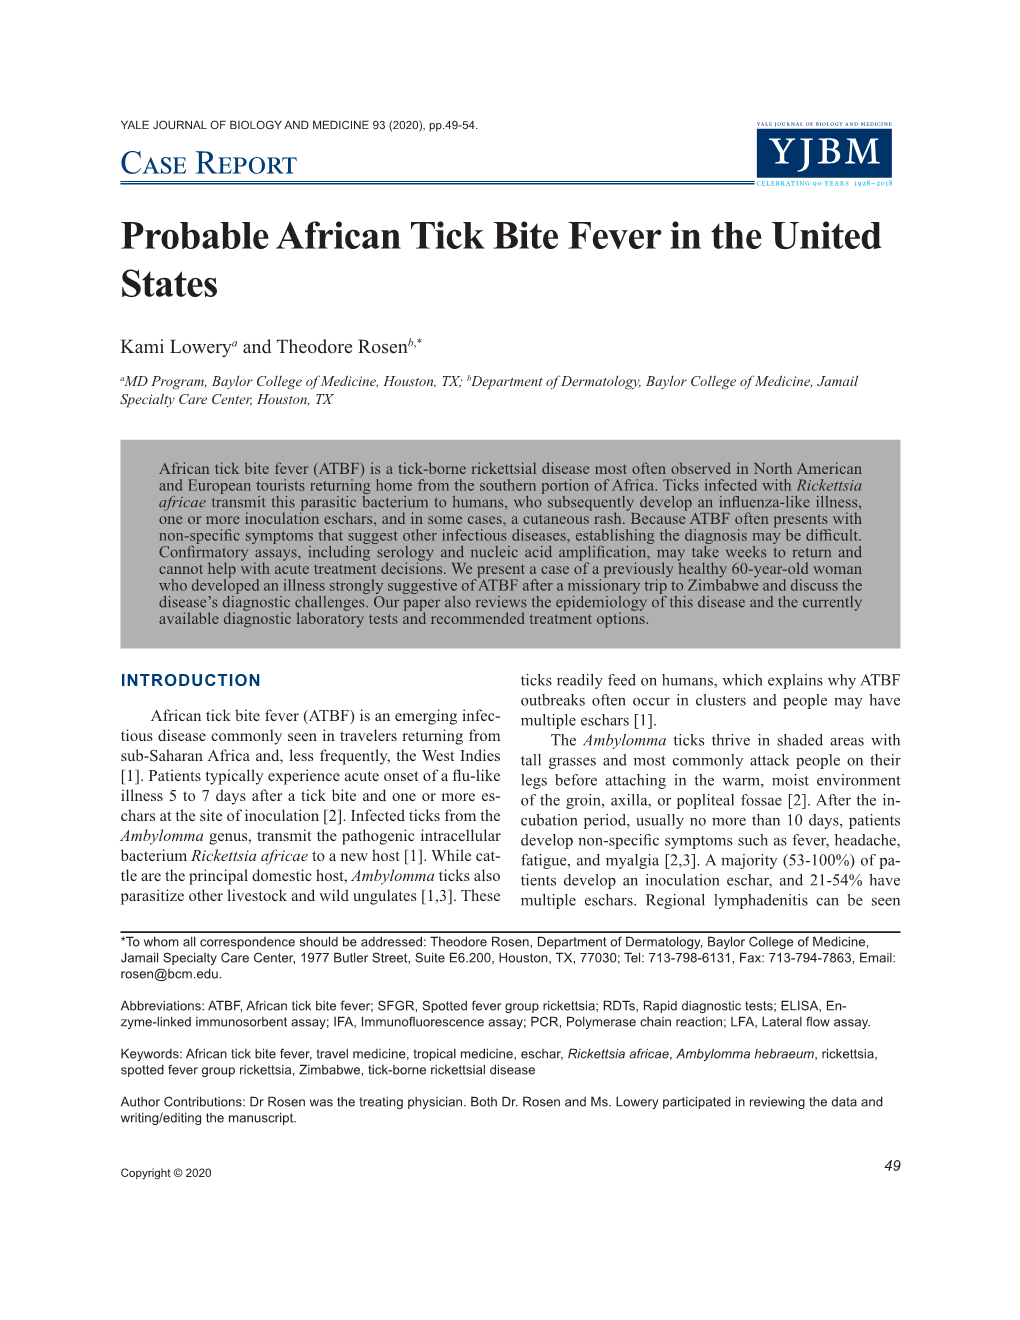 Probable African Tick Bite Fever in the United States